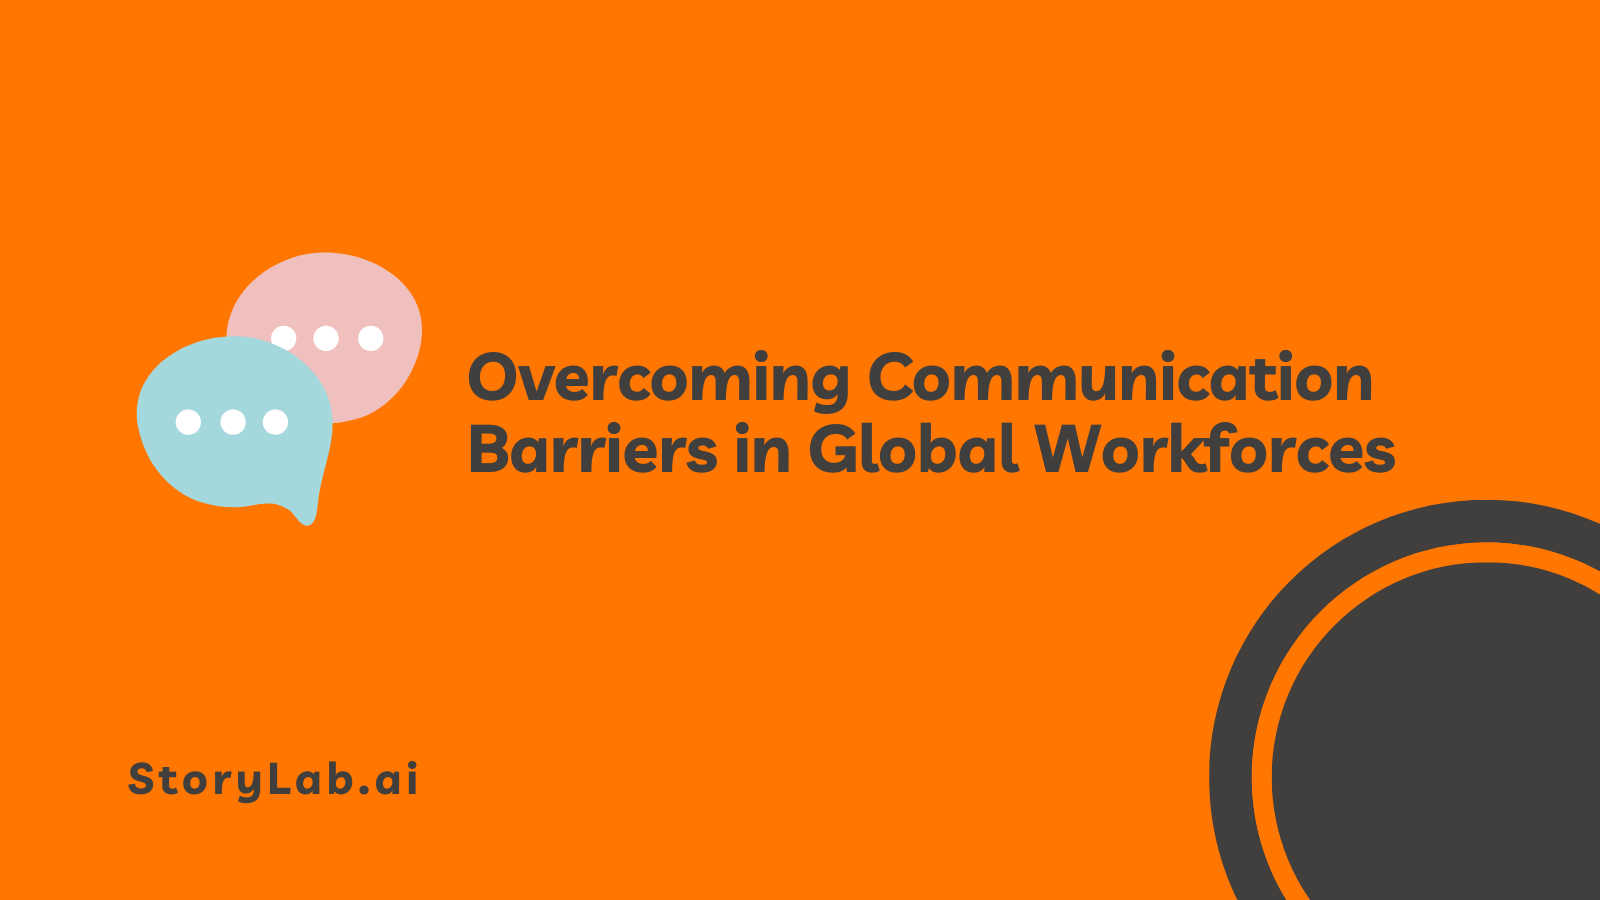 Overcoming Communication Barriers in Global Workforces